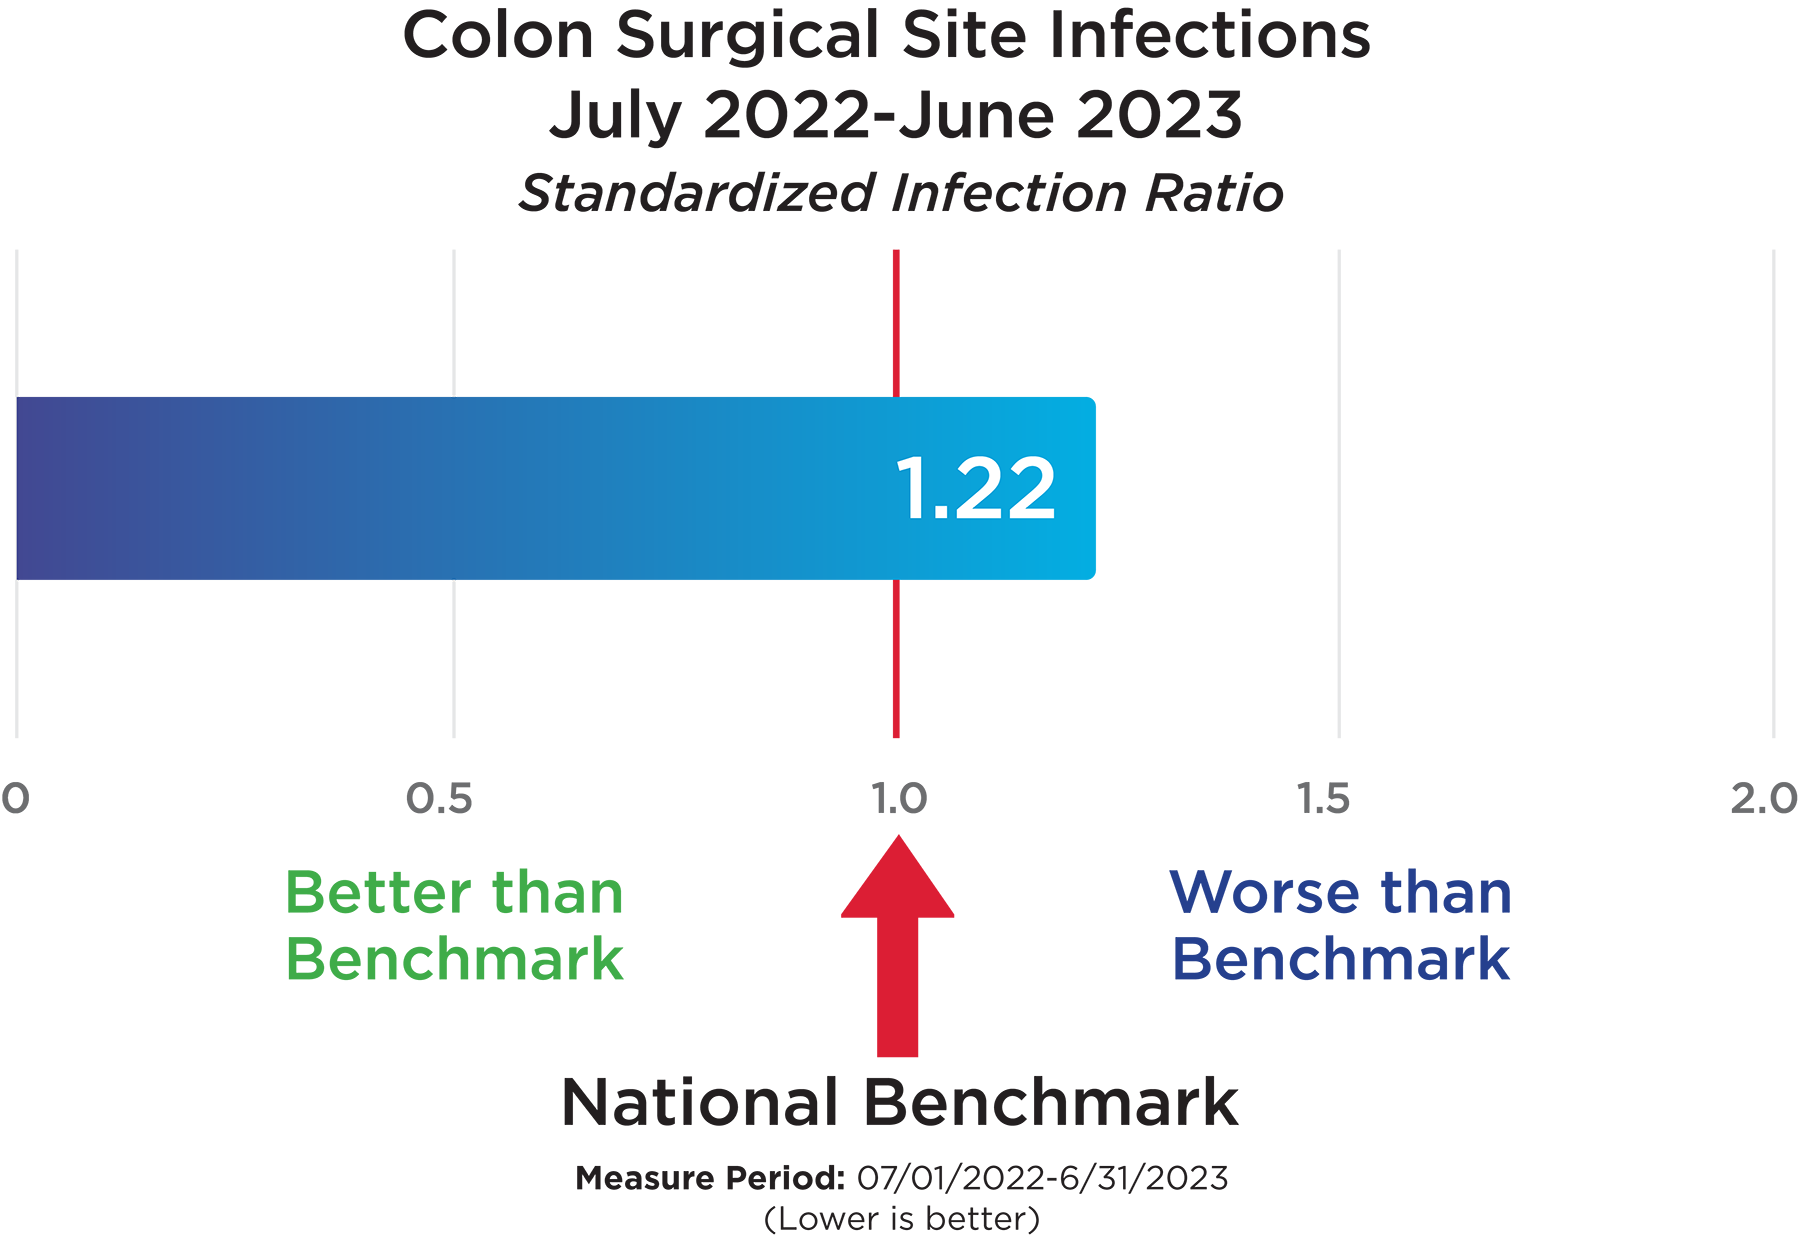 Colon Surgical Site Infections July 2022-June 2023